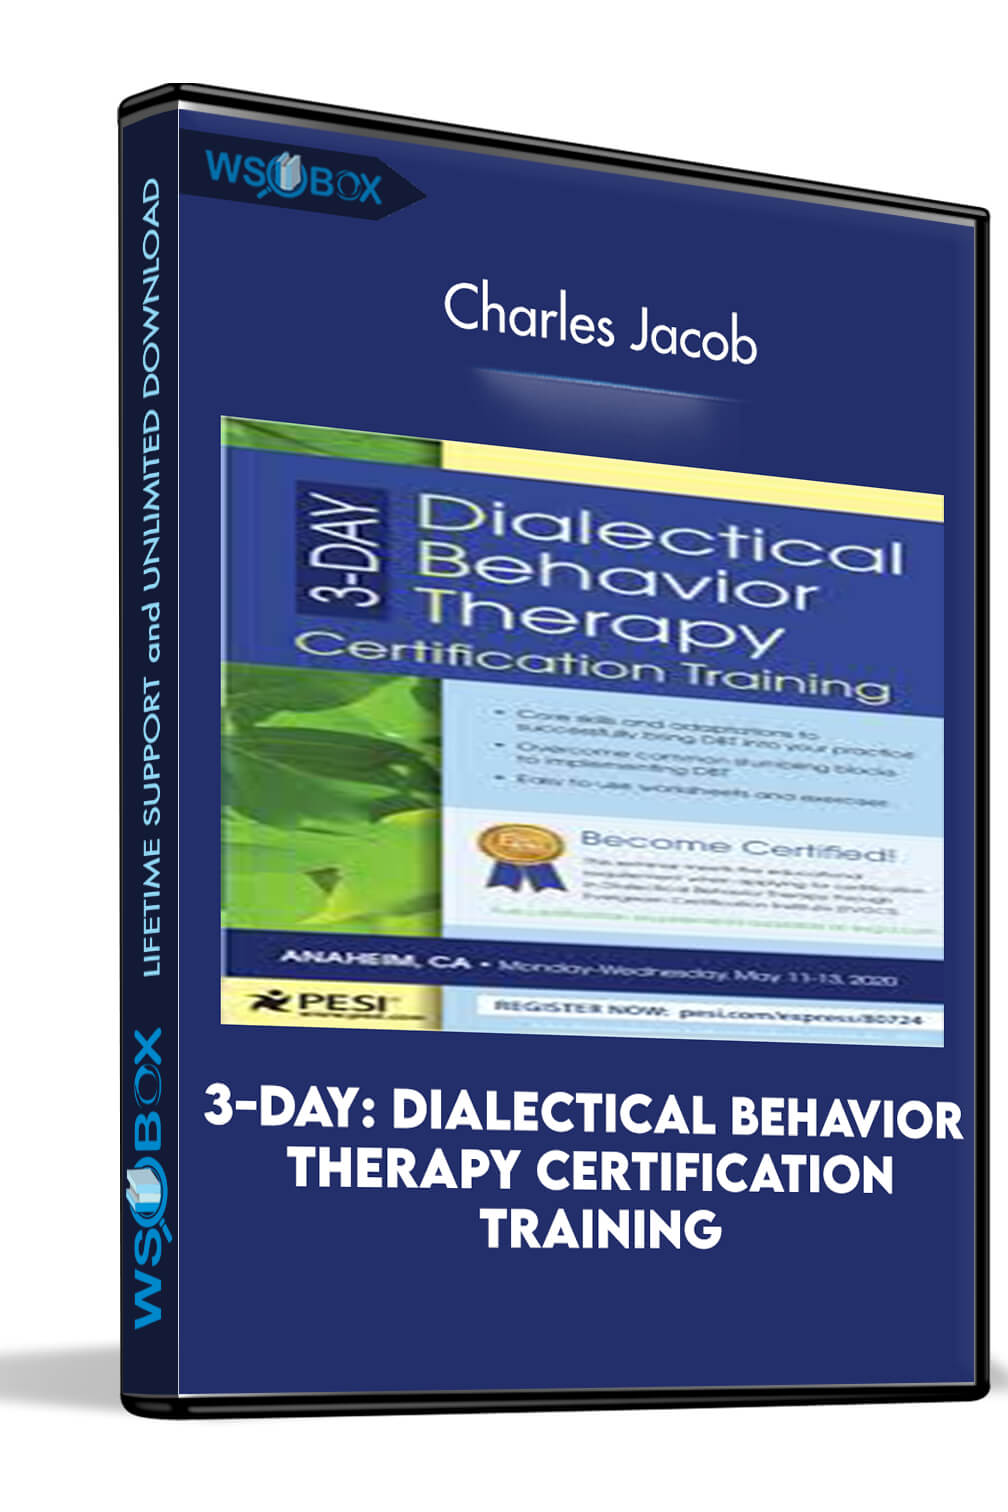 3-Day: Dialectical Behavior Therapy Certification Training – Charles Jacob